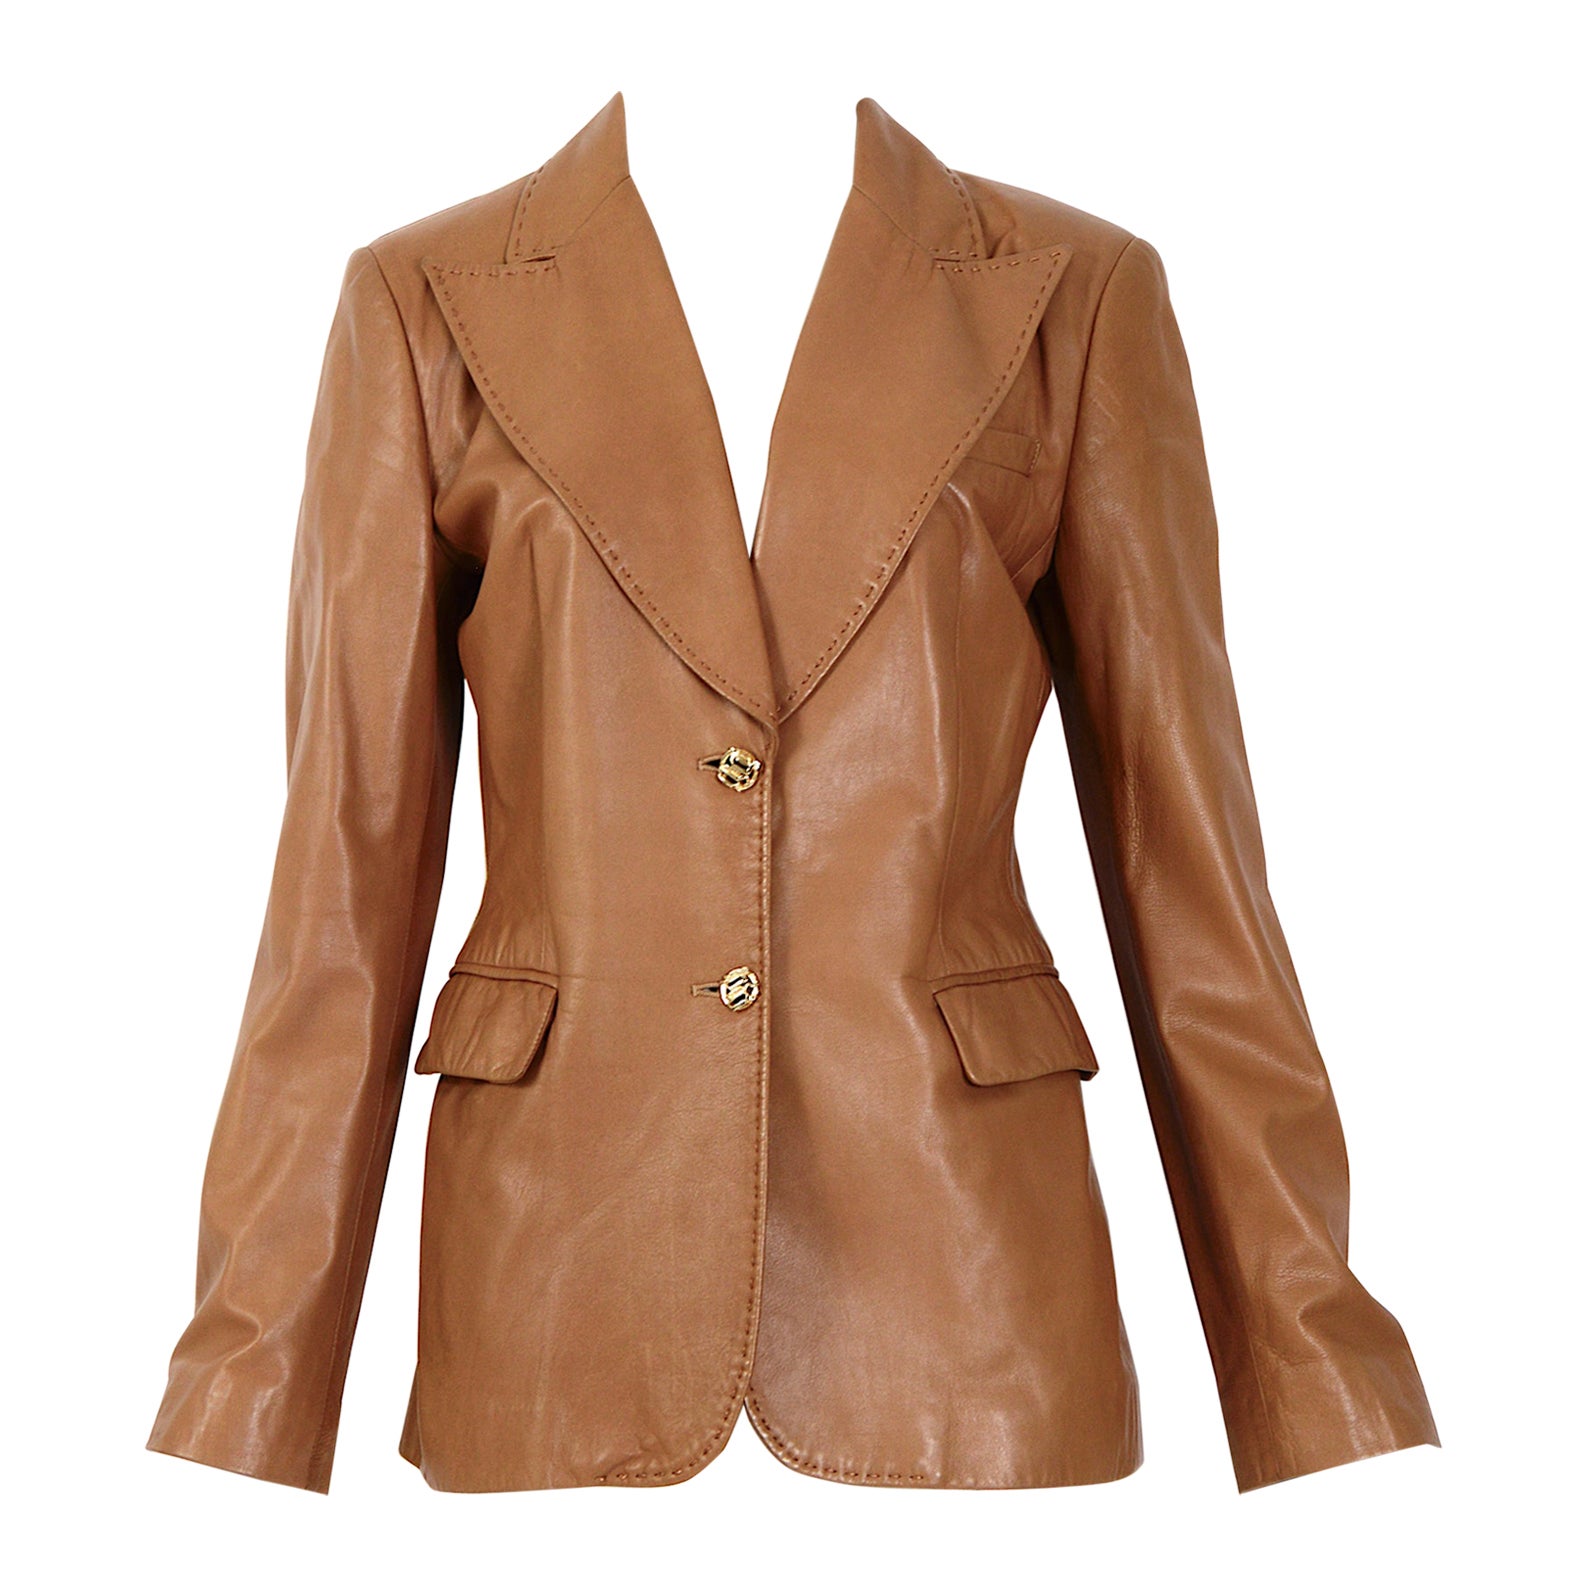 Vintage 1990s Gianni Versace timeless soft leather tailored jacket For Sale